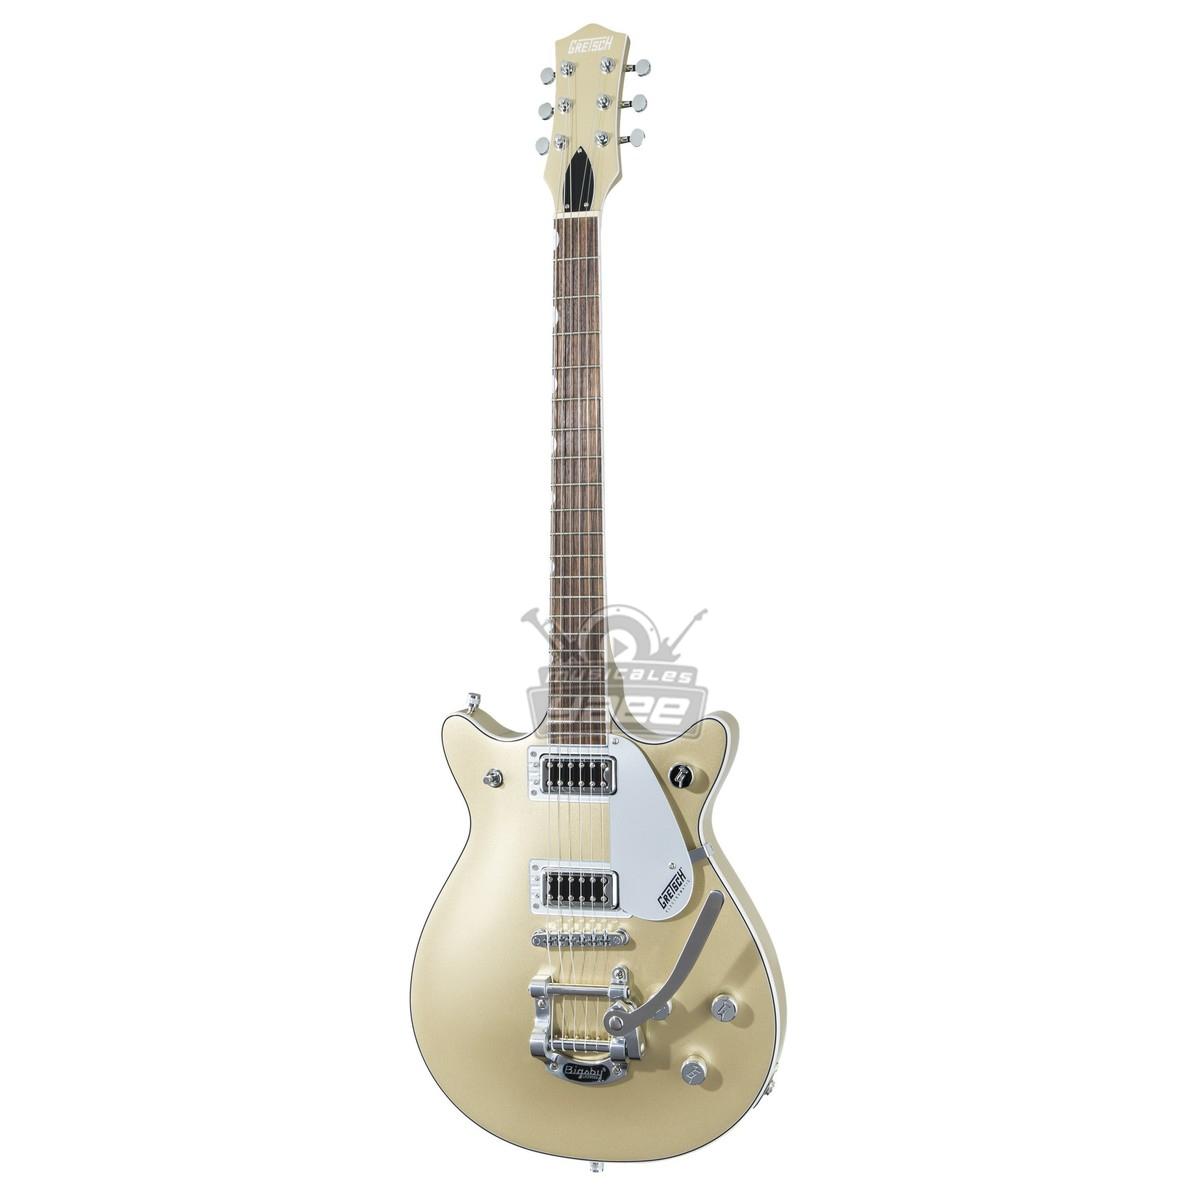 GUITARRA GRETSCH G5232T ELECTROMATIC DOBLE JET with Bigsby Laurel Fingerboard Casino Gold